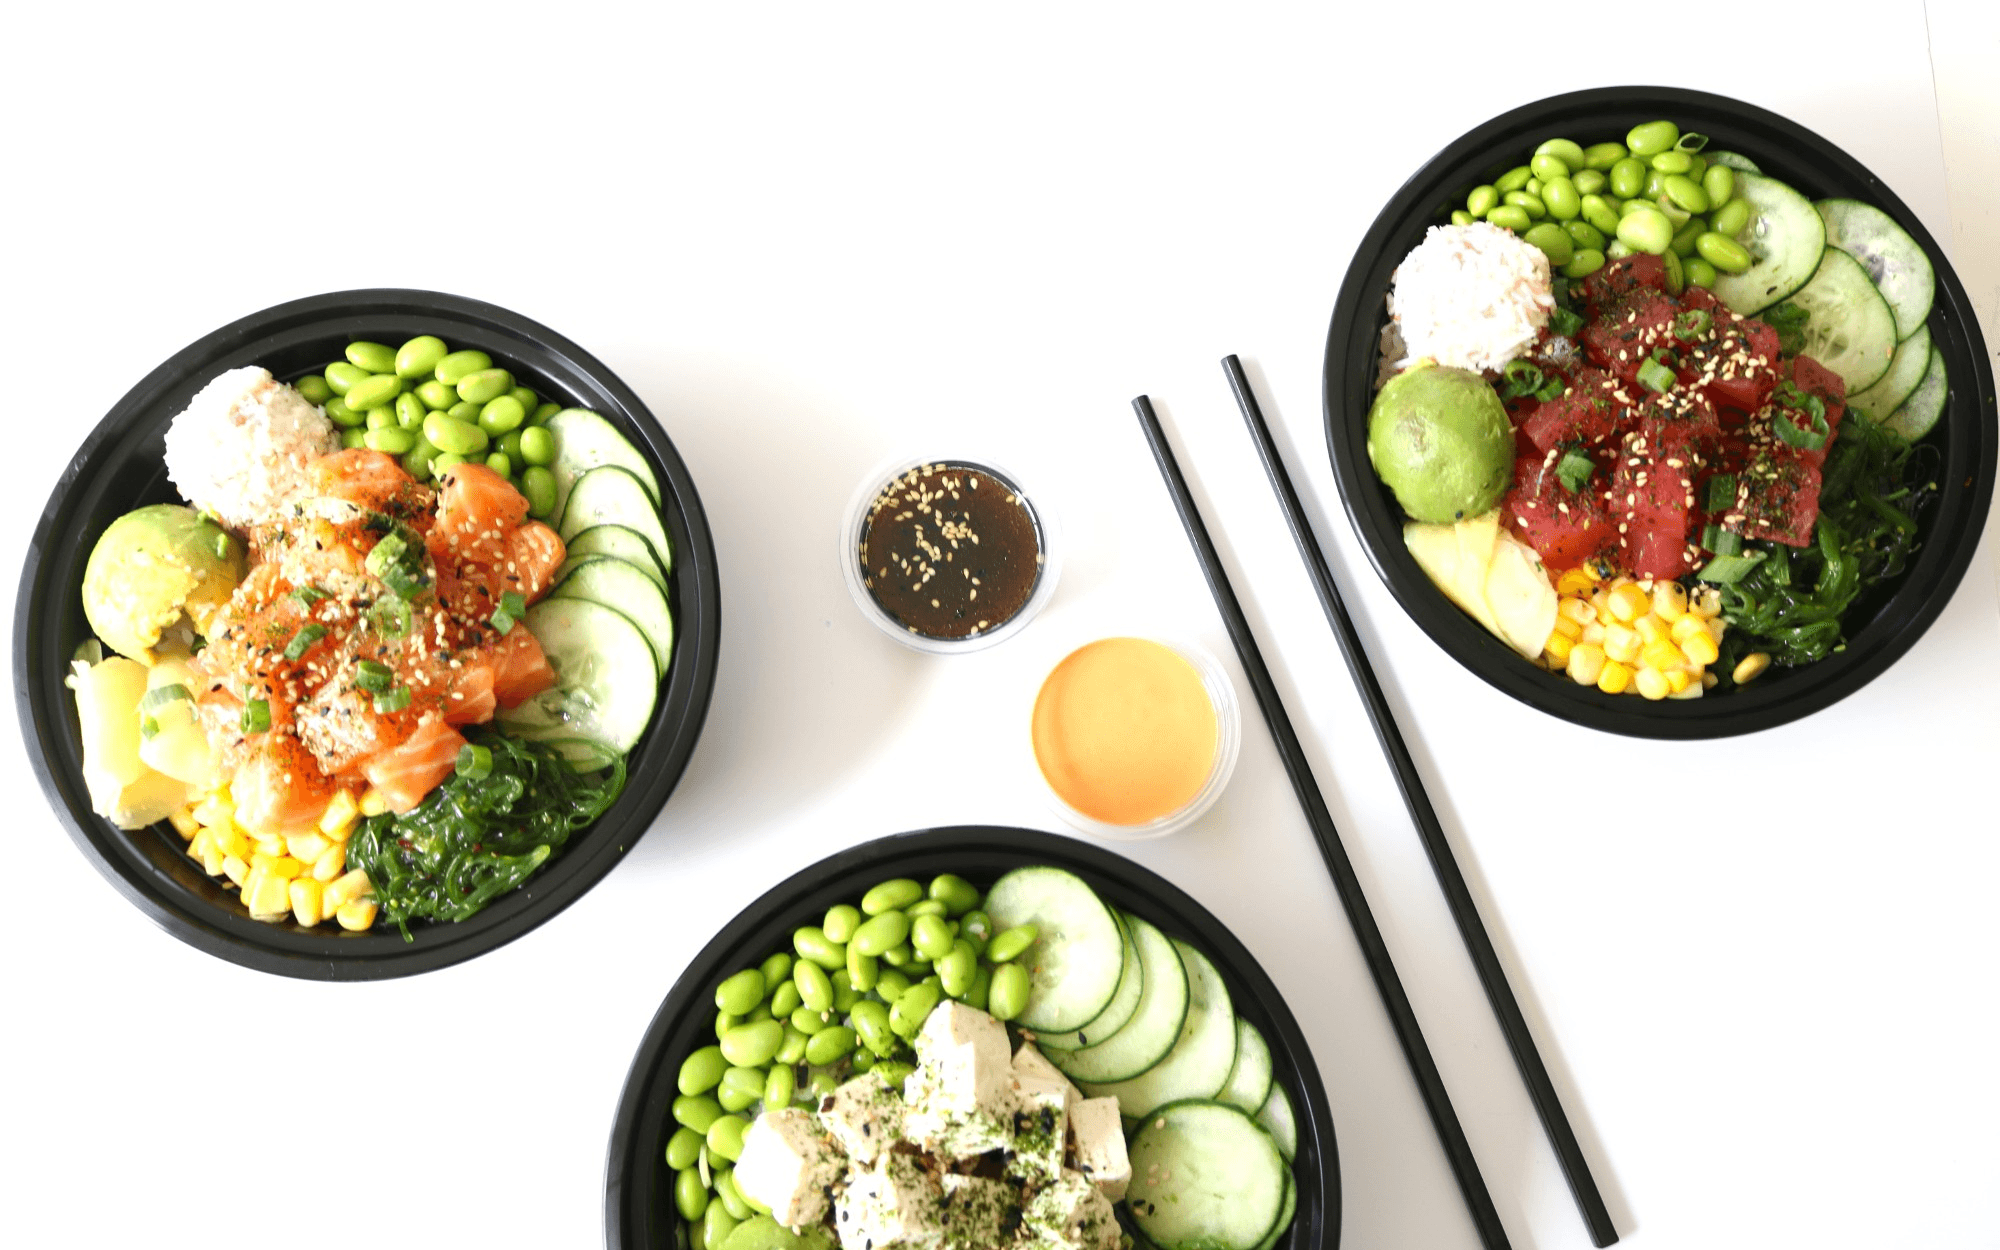 Poke Art - Fresh ingredients and made to order— and honestly so delicious.  We are open till 9 PM! #pokebowl #healthyfood #healthylifestyle #fresh #956